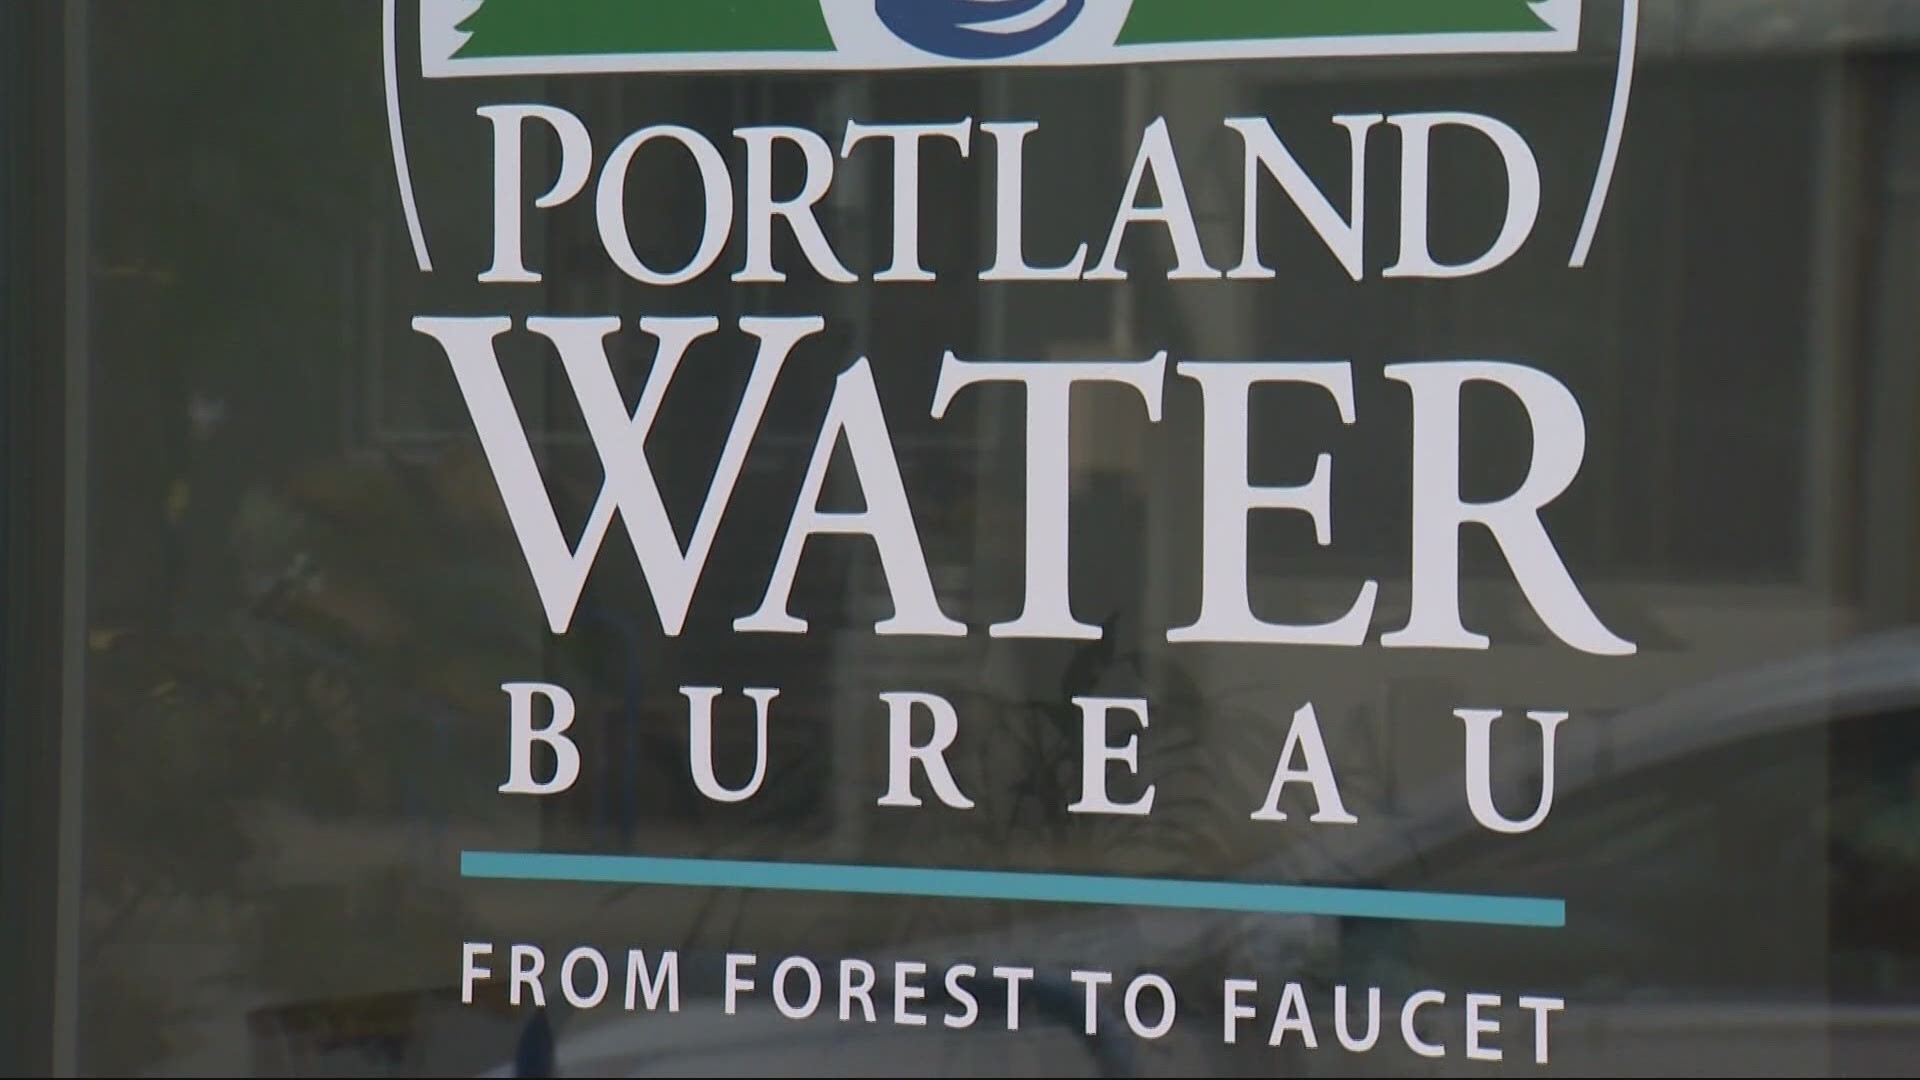 Oregonians are asked to limit outdoor water use for things like watering lawns and filling swimming pools to extend the state’s chlorine supply.